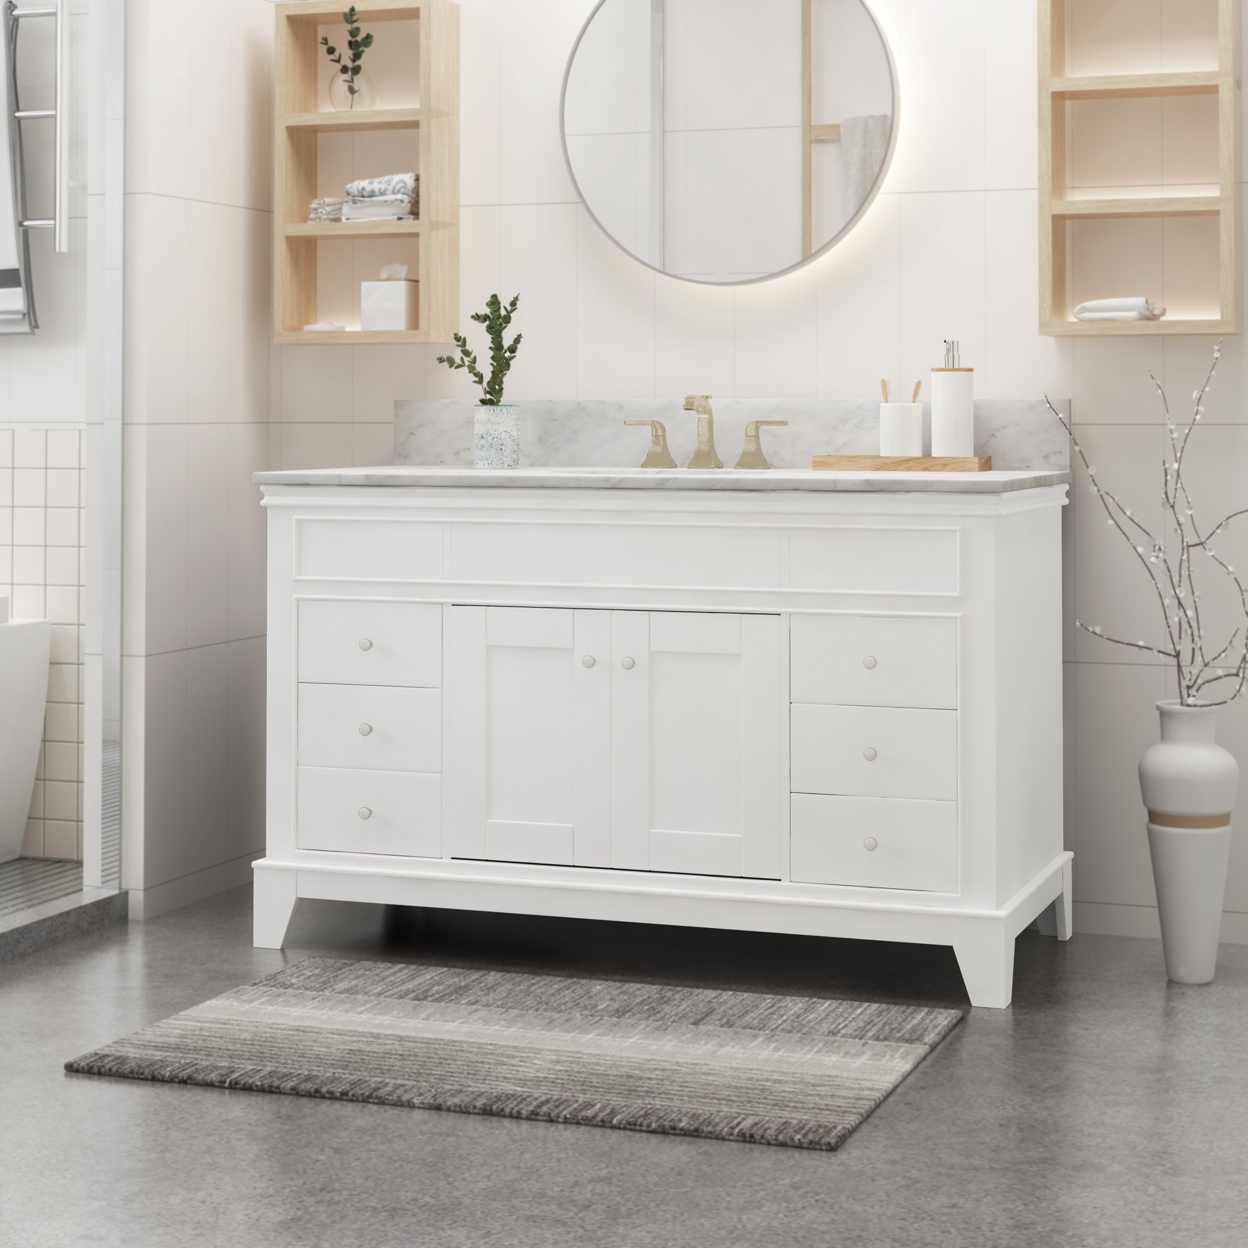 Feldspar Contemporary 48 Wood Bathroom Vanity (Counter Top Not Included) - White